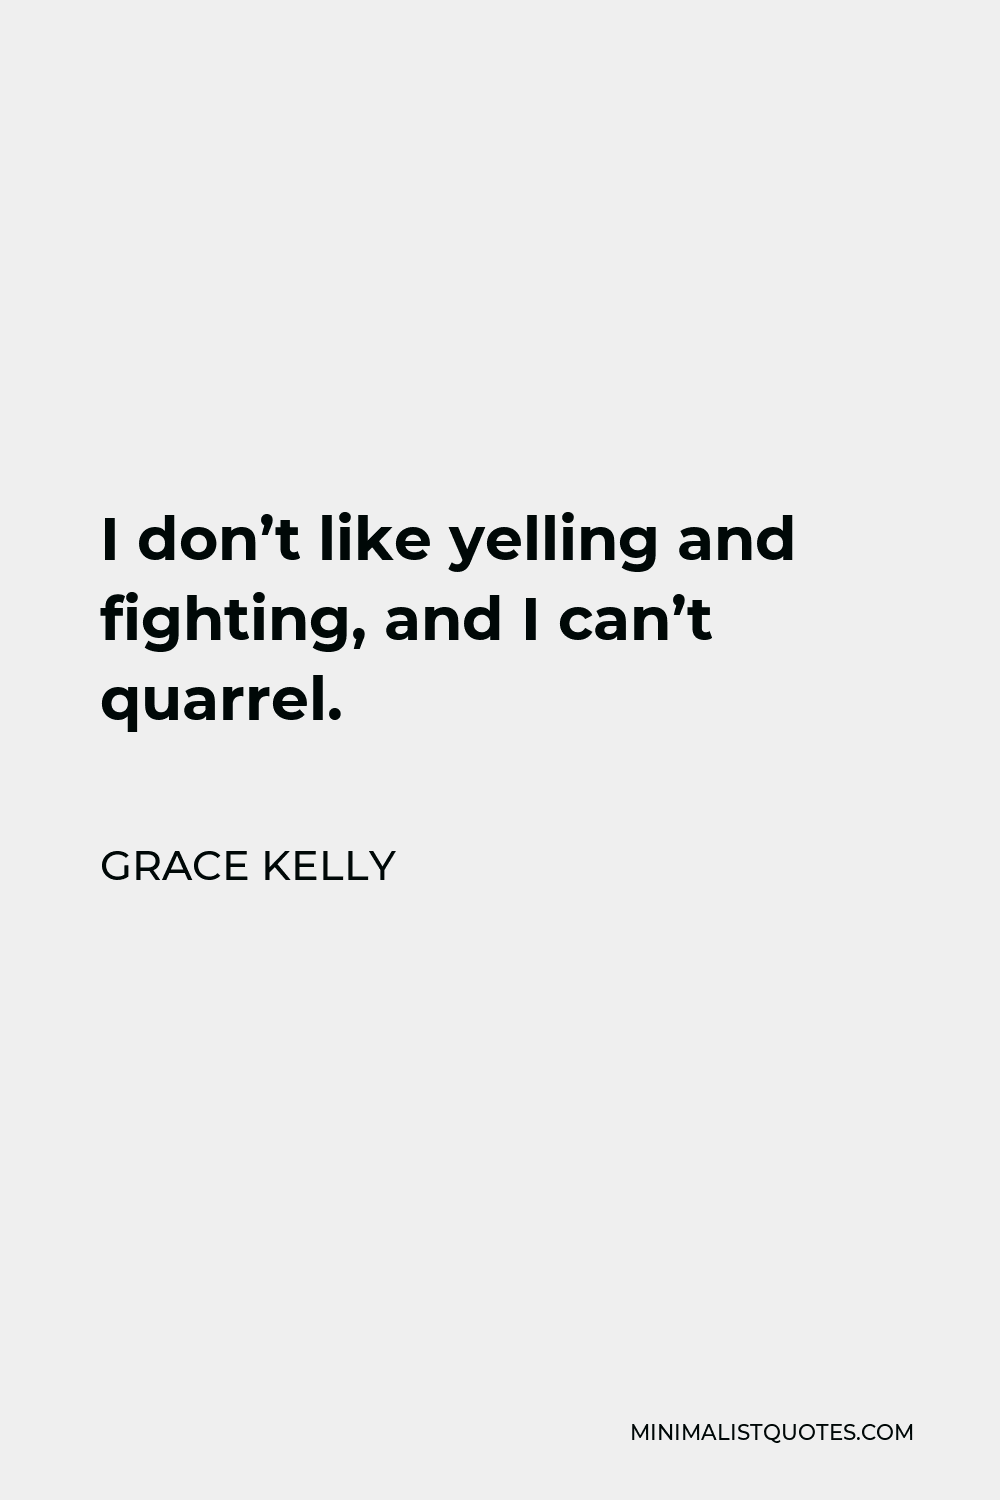 Grace Kelly Quote - I don’t like yelling and fighting, and I can’t quarrel.